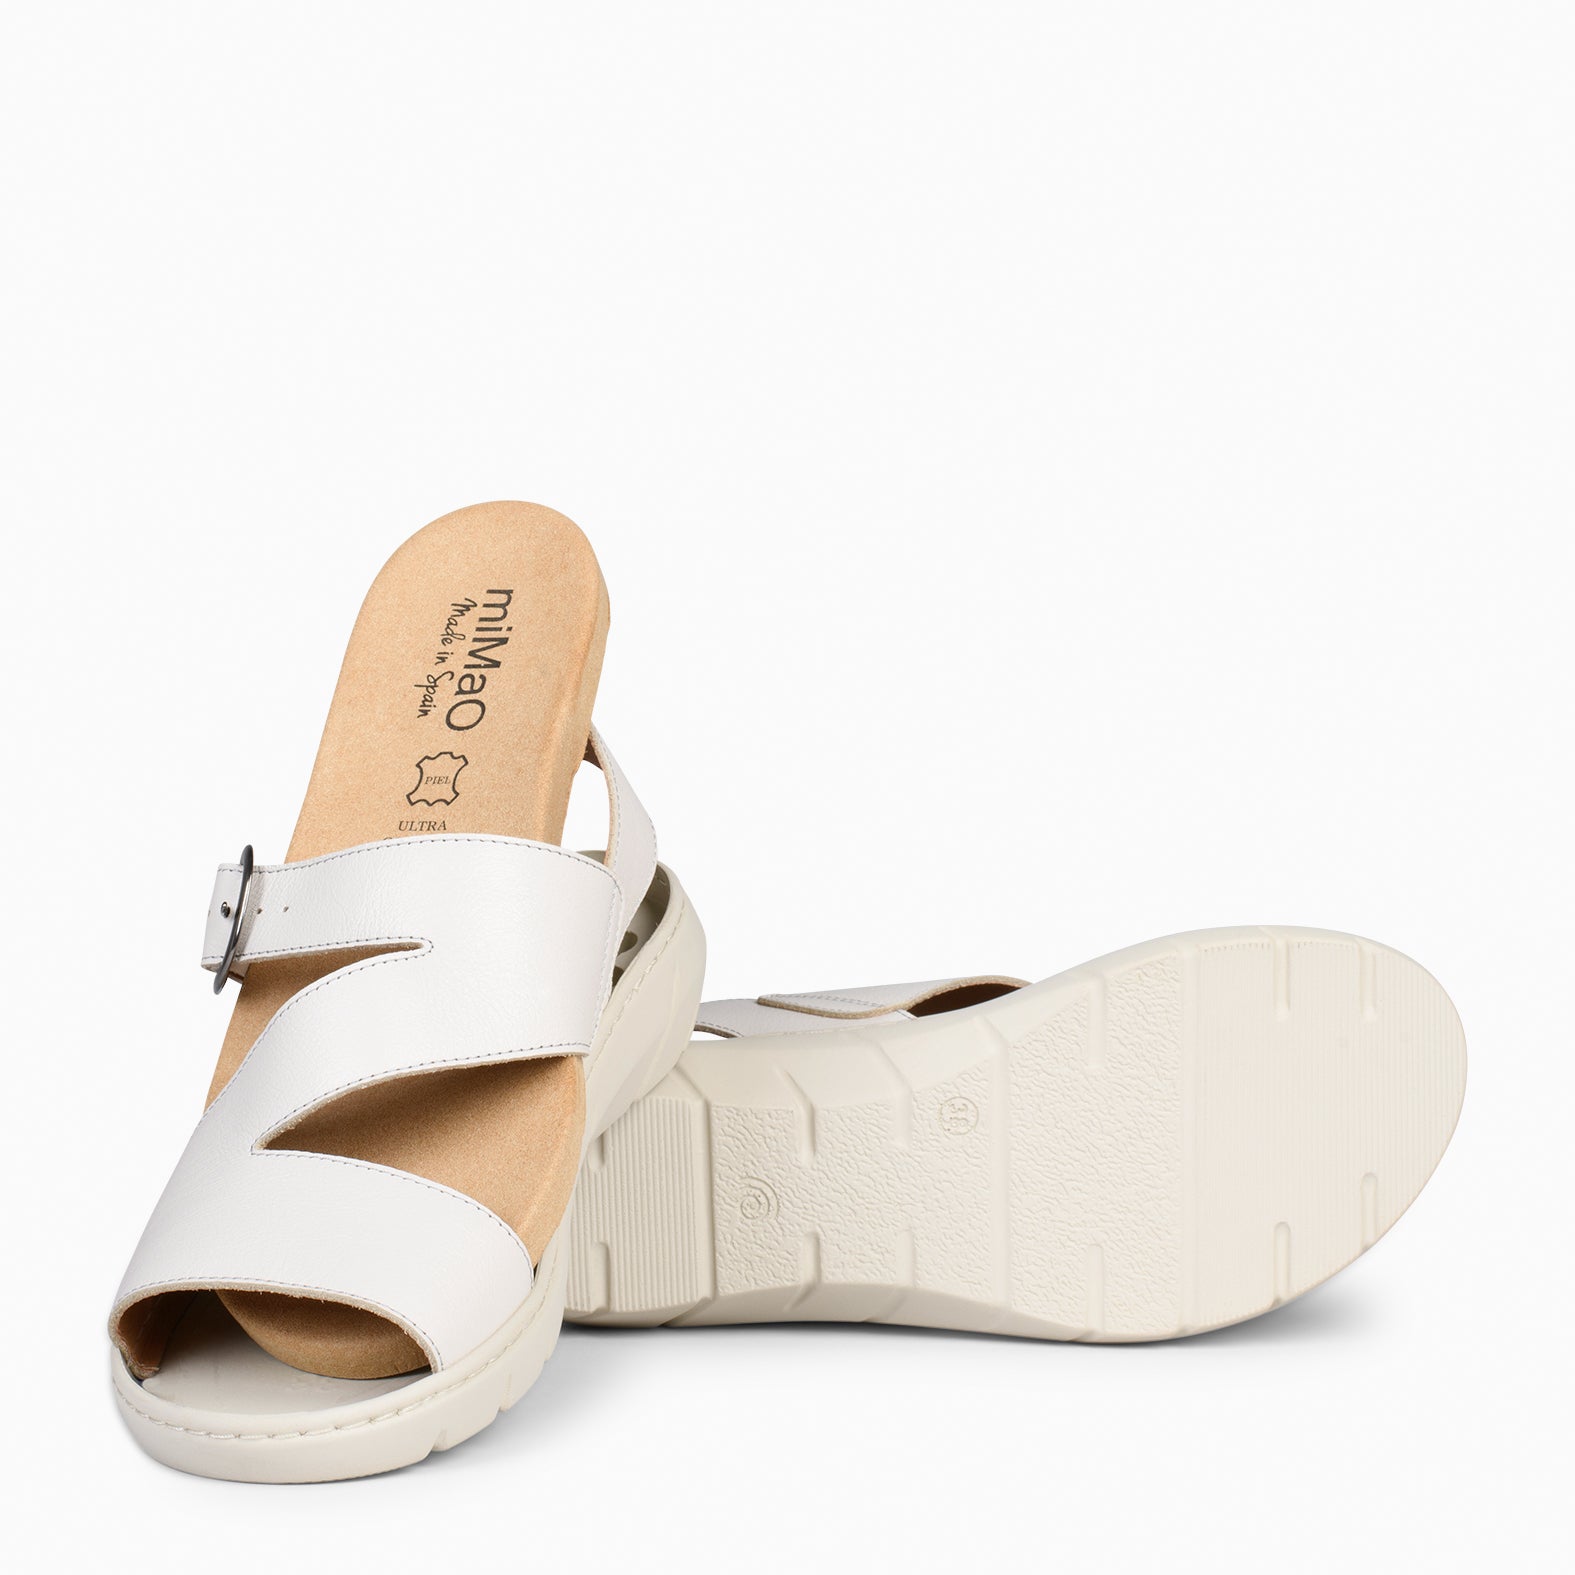 NATURA – WHITE sandals with removable insole